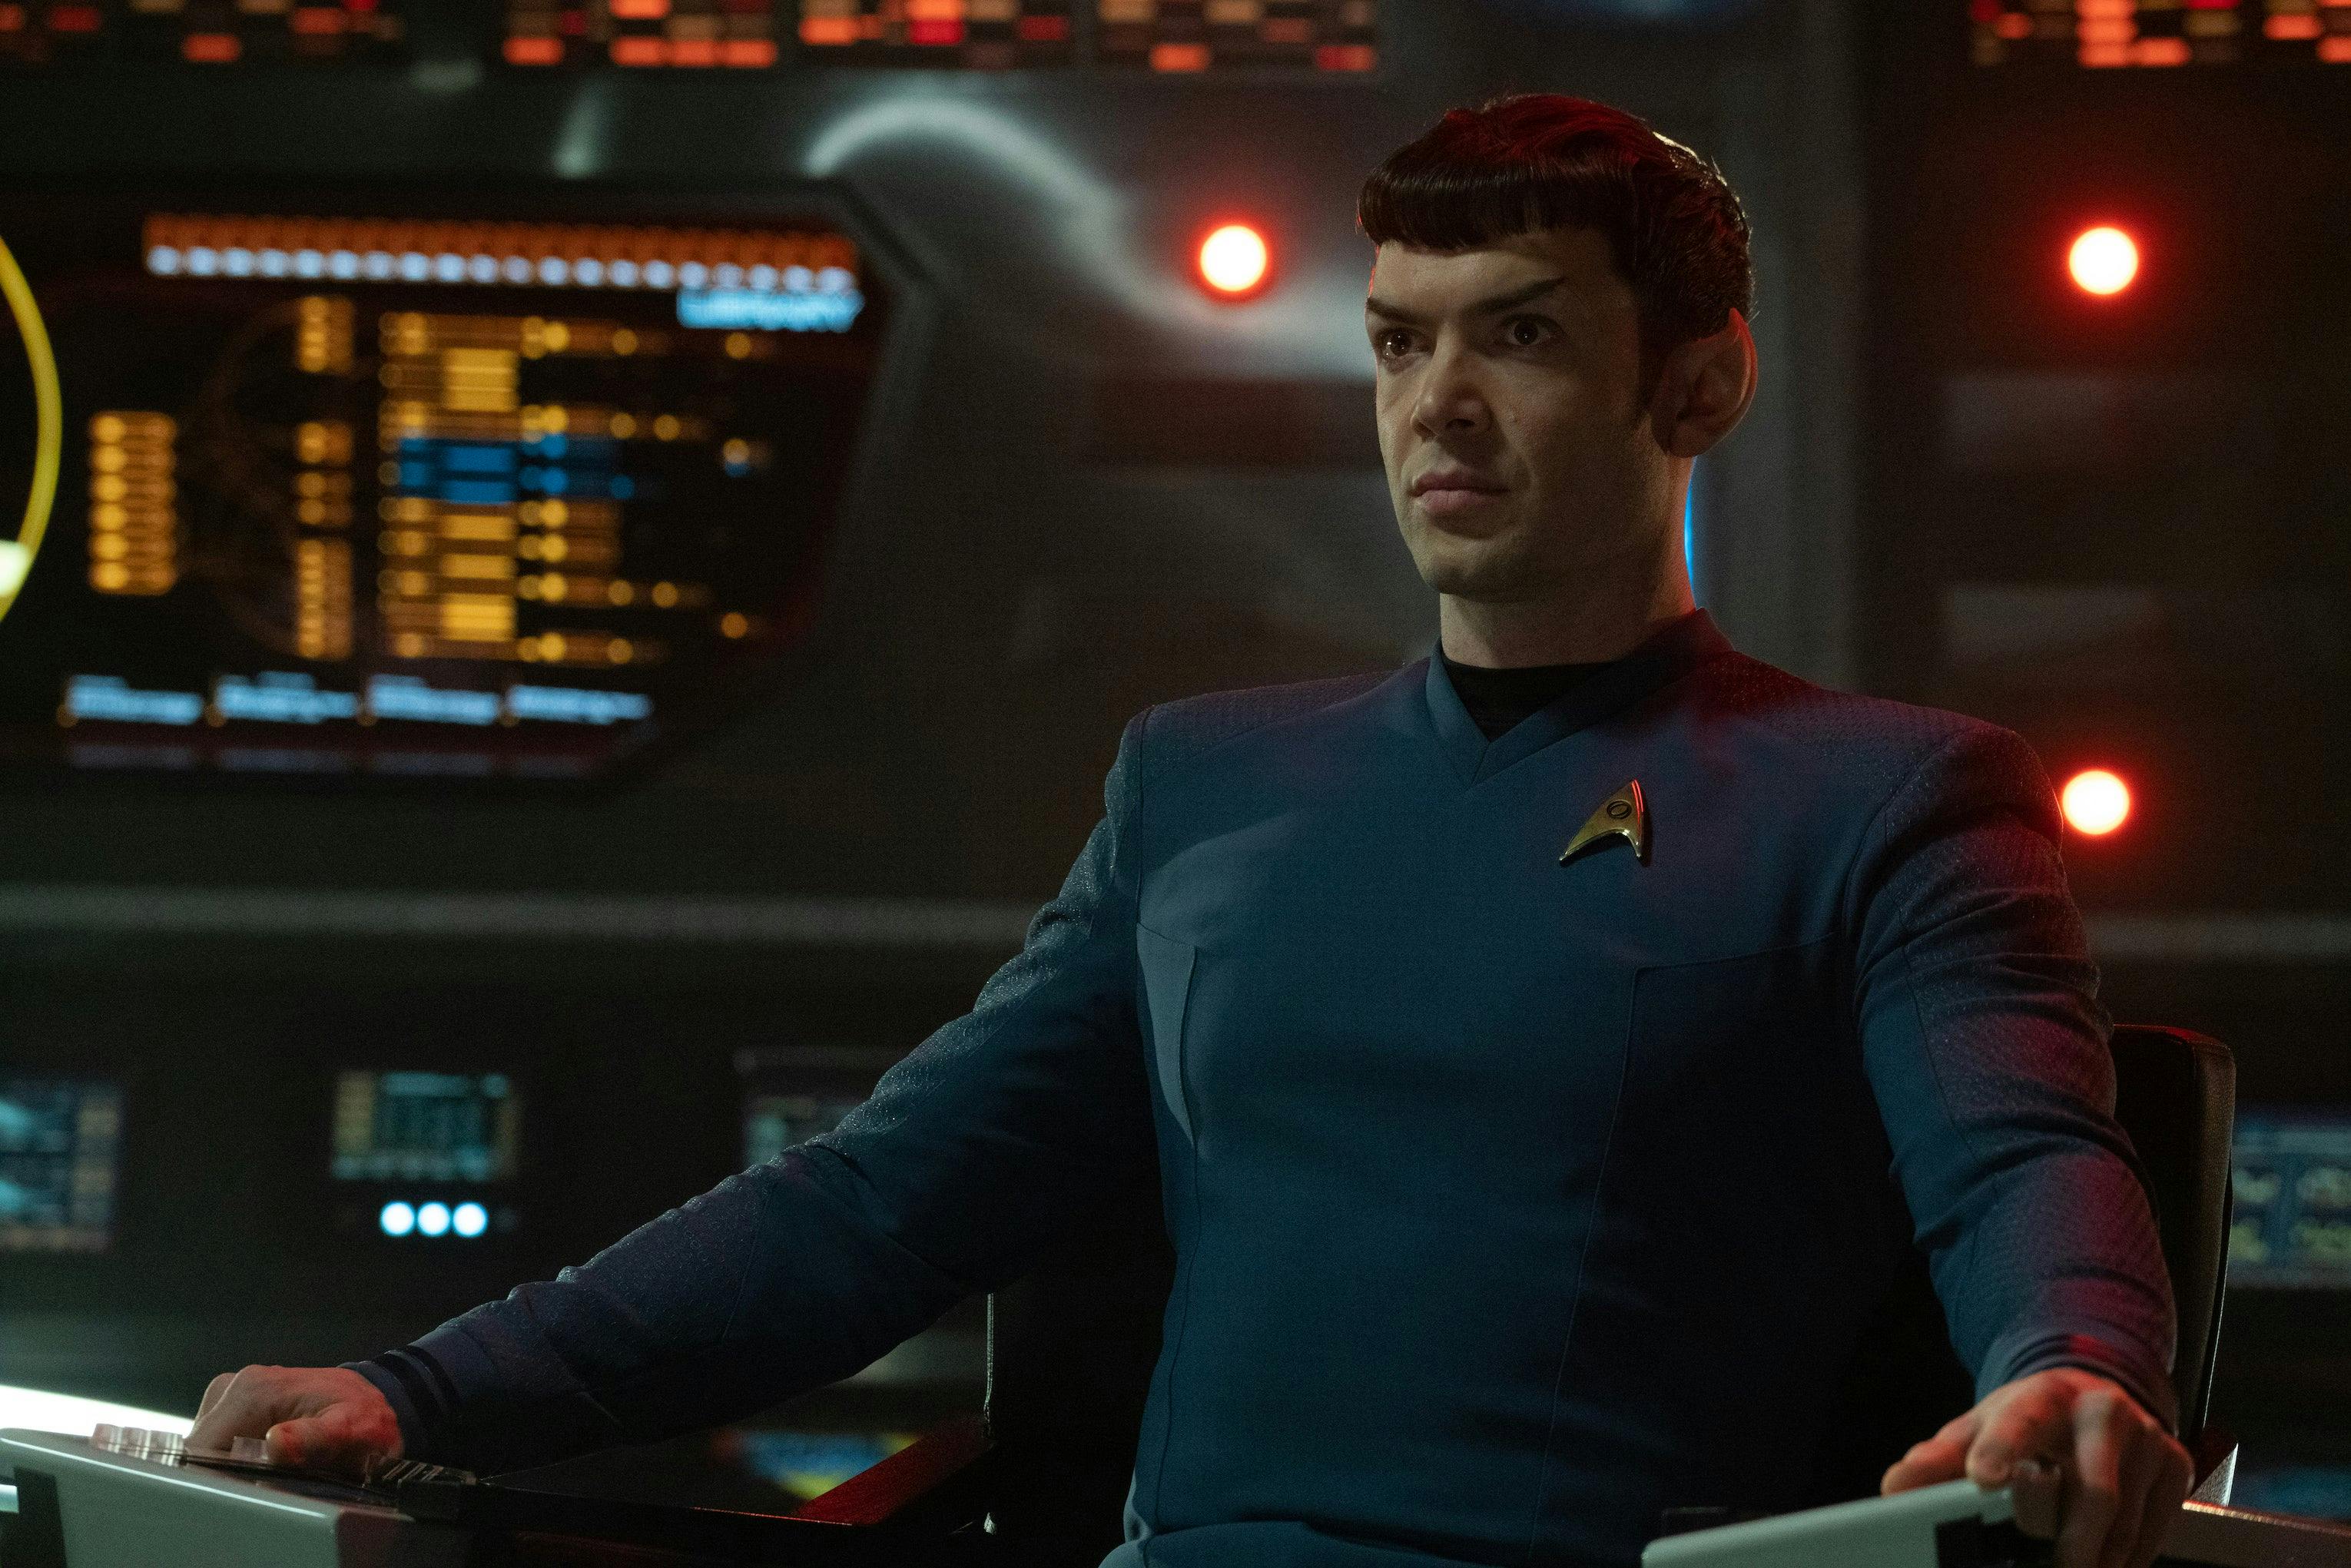 Spock sits in the captain's chair on the bridge